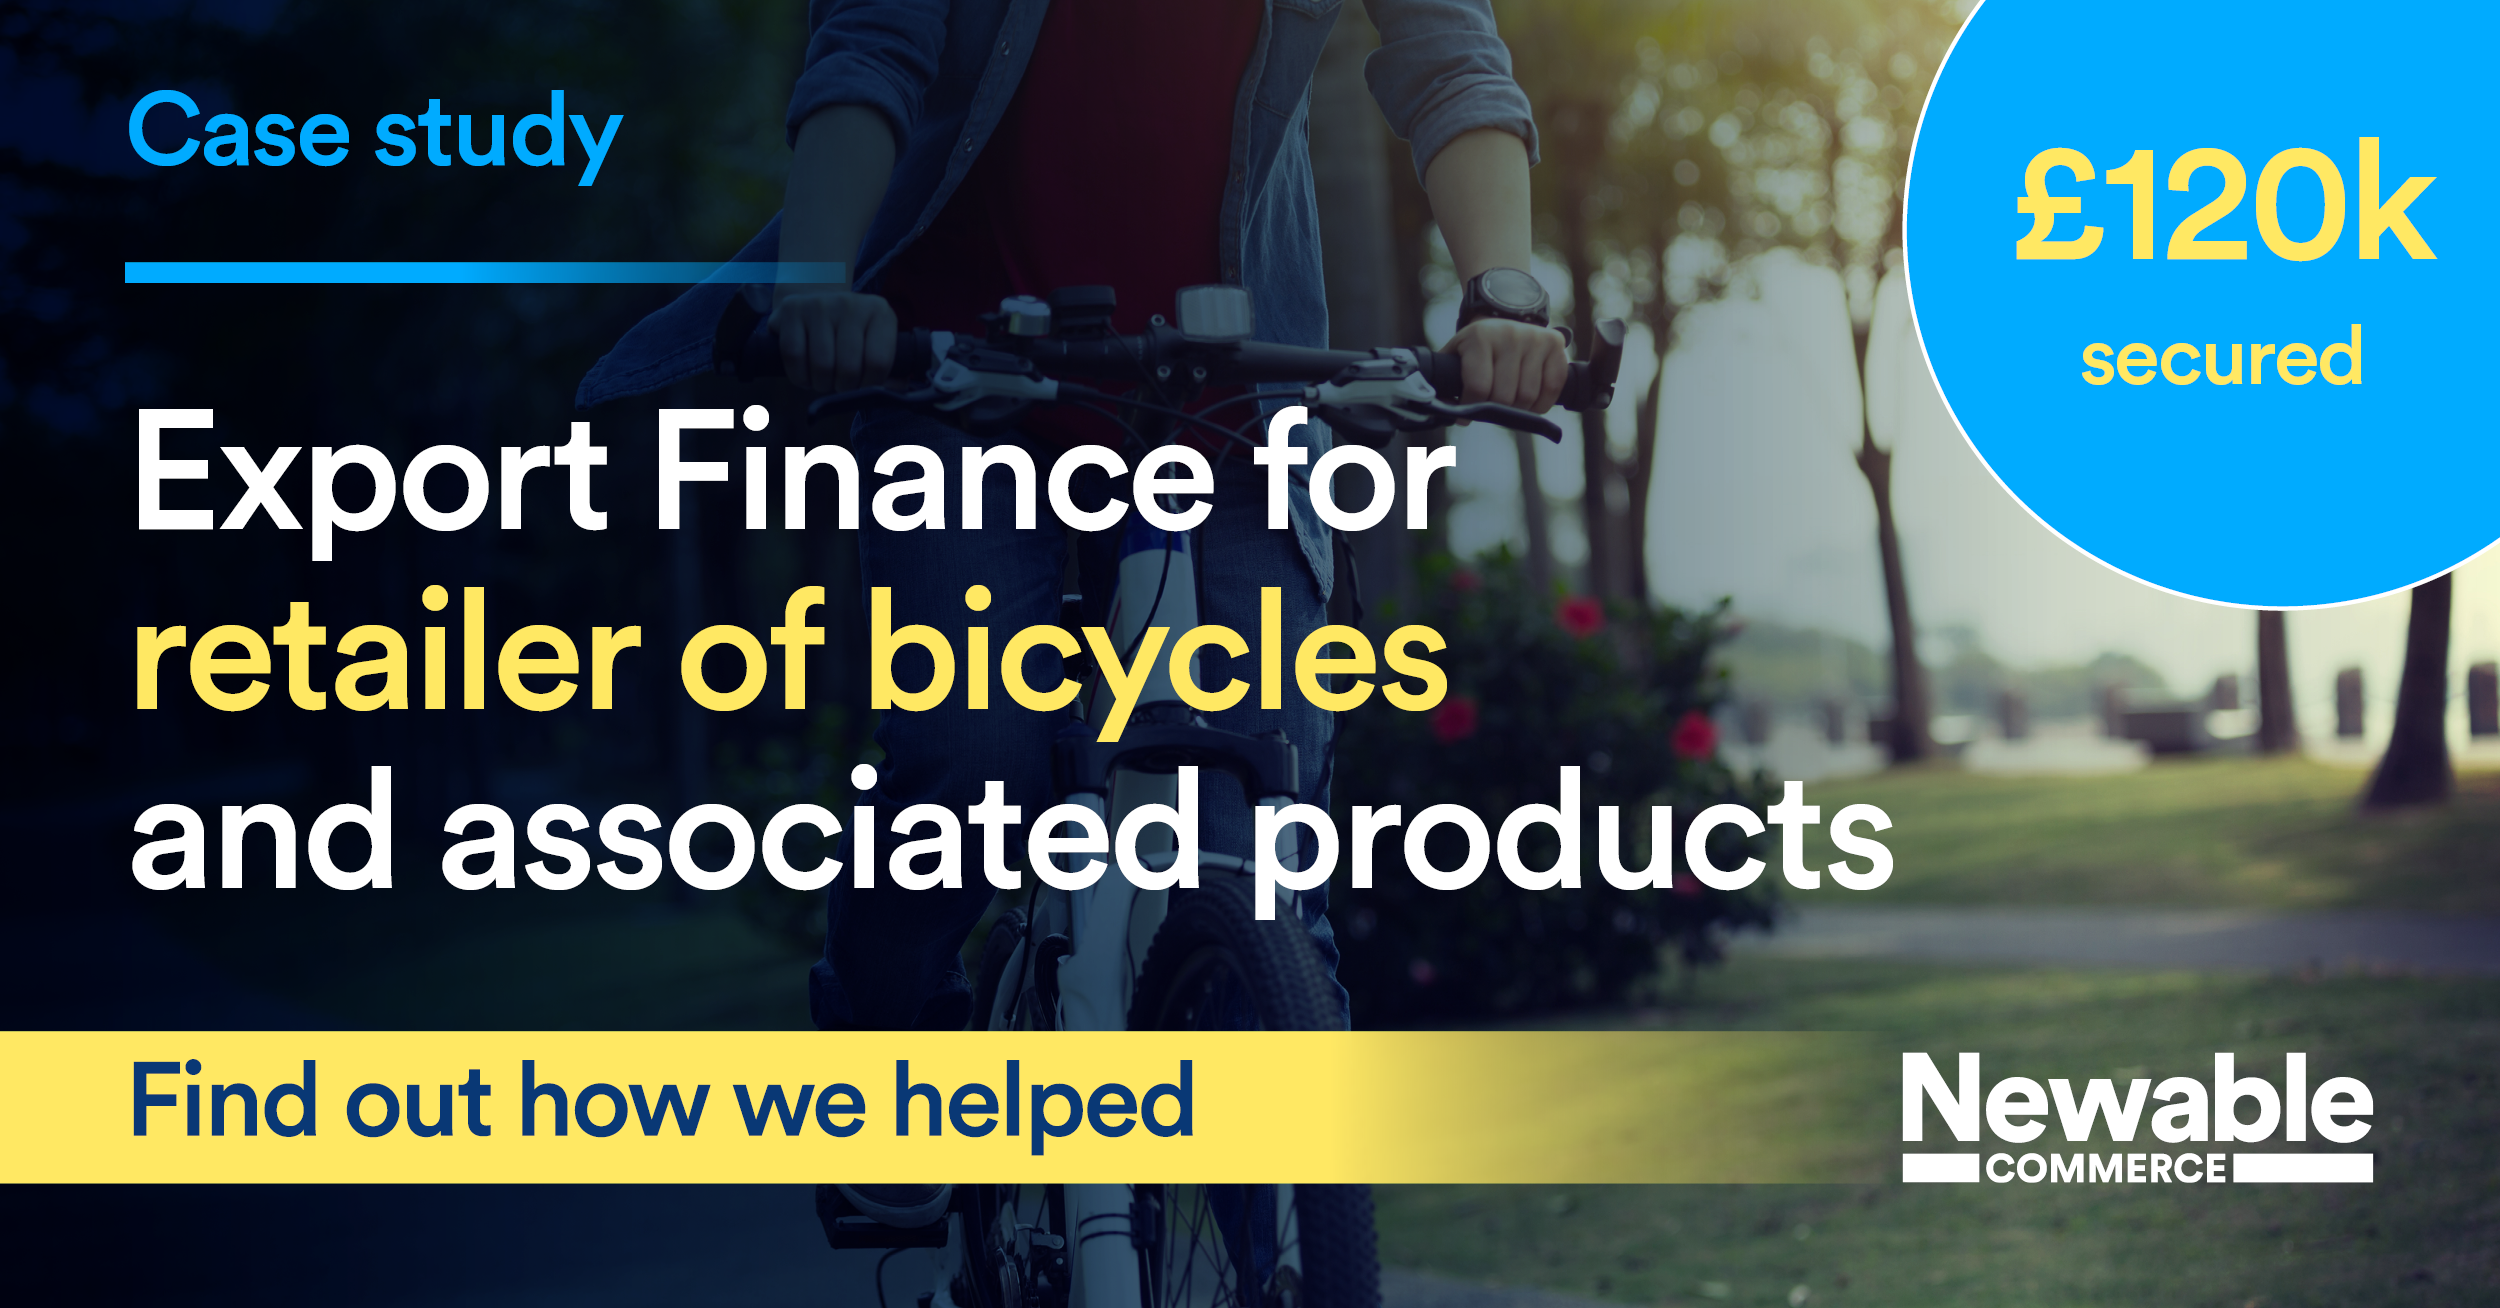 Export Finance for retailer of bicycles and associated products